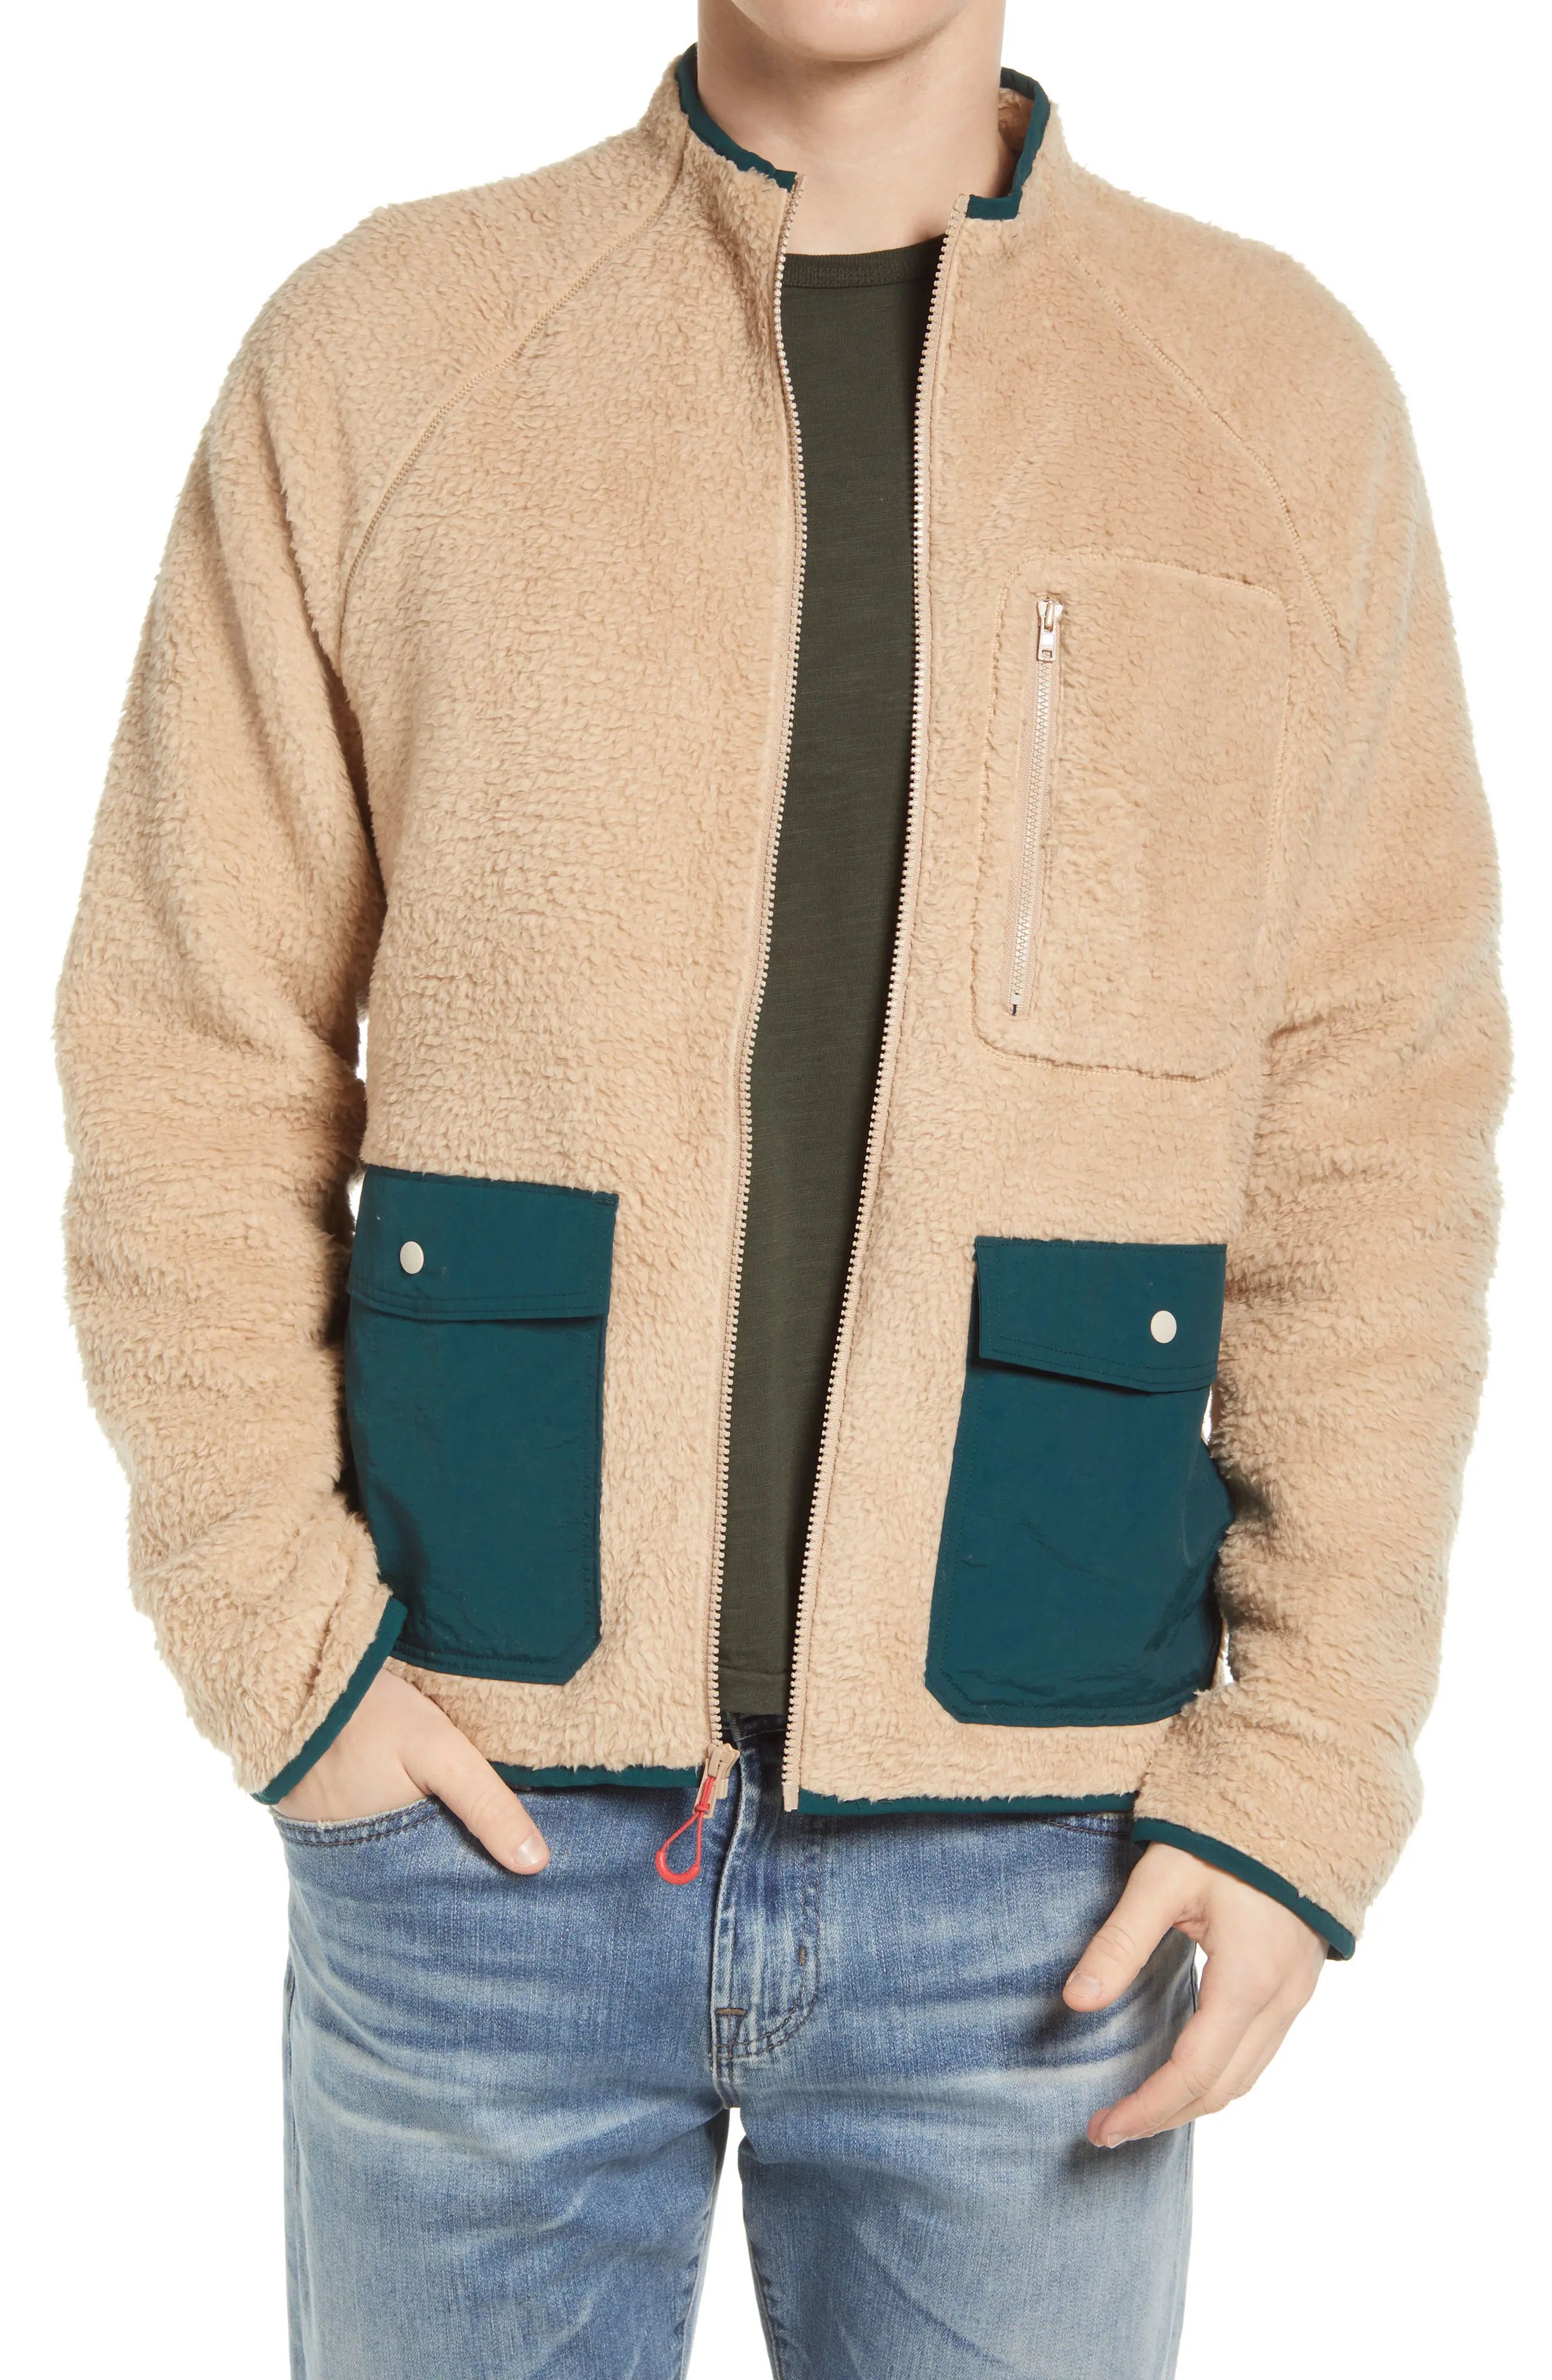 Outerknown Skyline High Pile Fleece Jacket in Raffia at Nordstrom, Size Large | Nordstrom